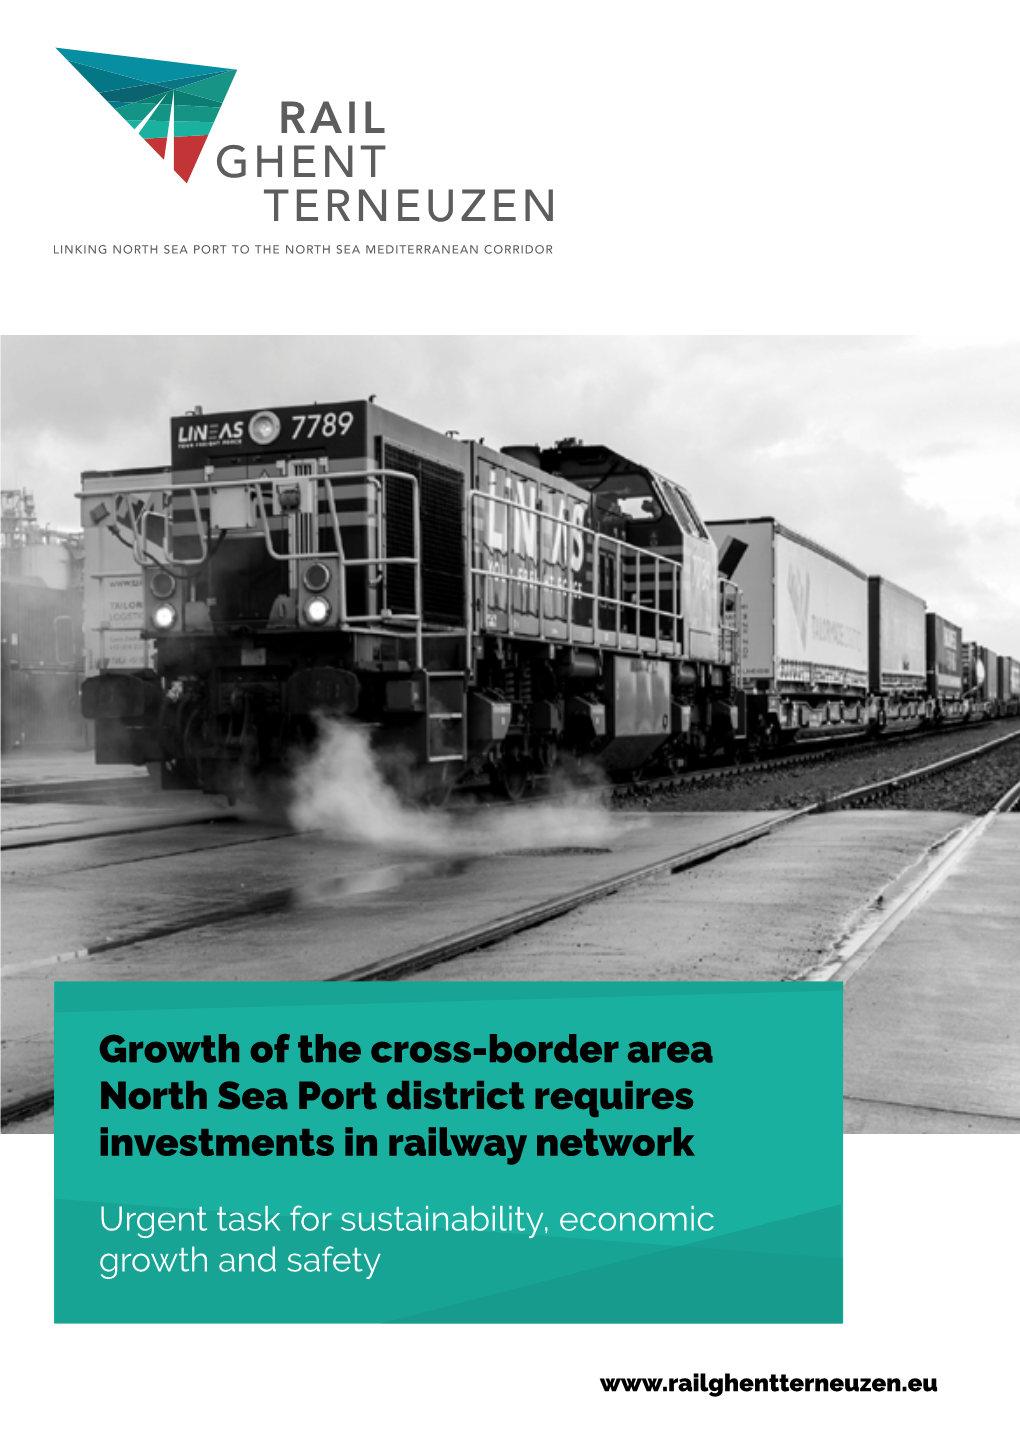 Growth of the Cross-Border Area North Sea Port District Requires Investments in Railway Network